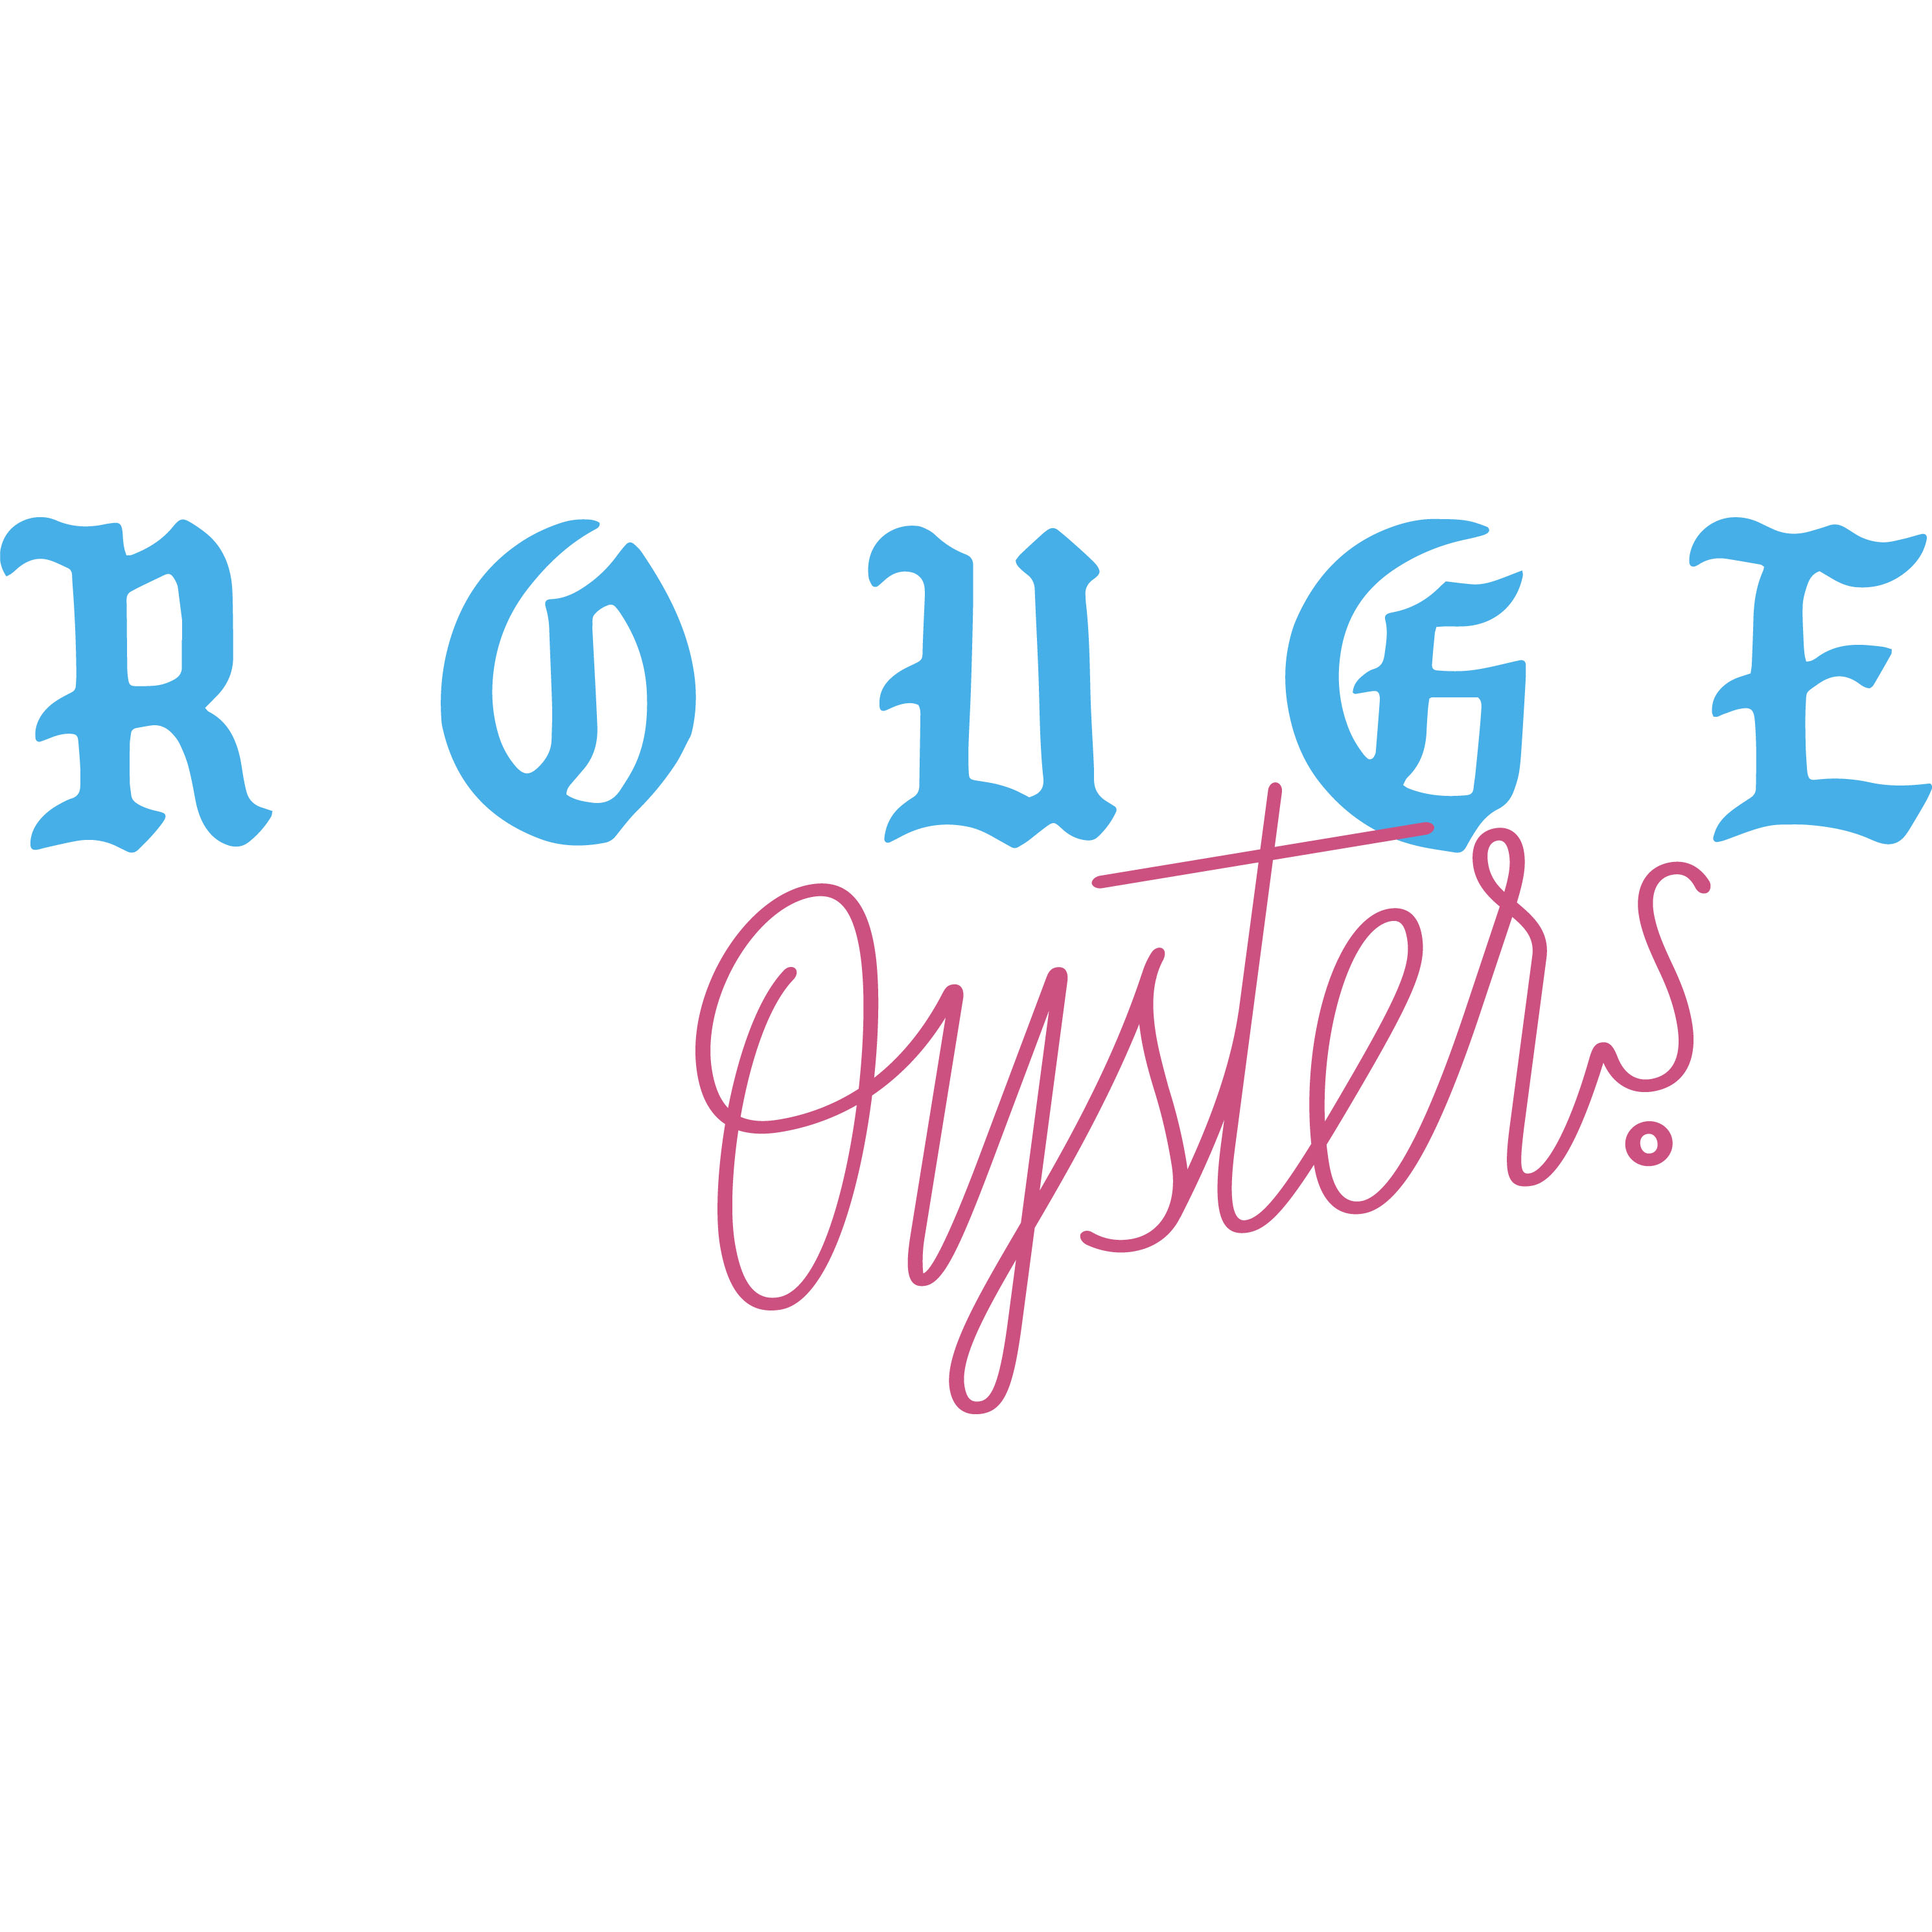 Rouge Oysters logo